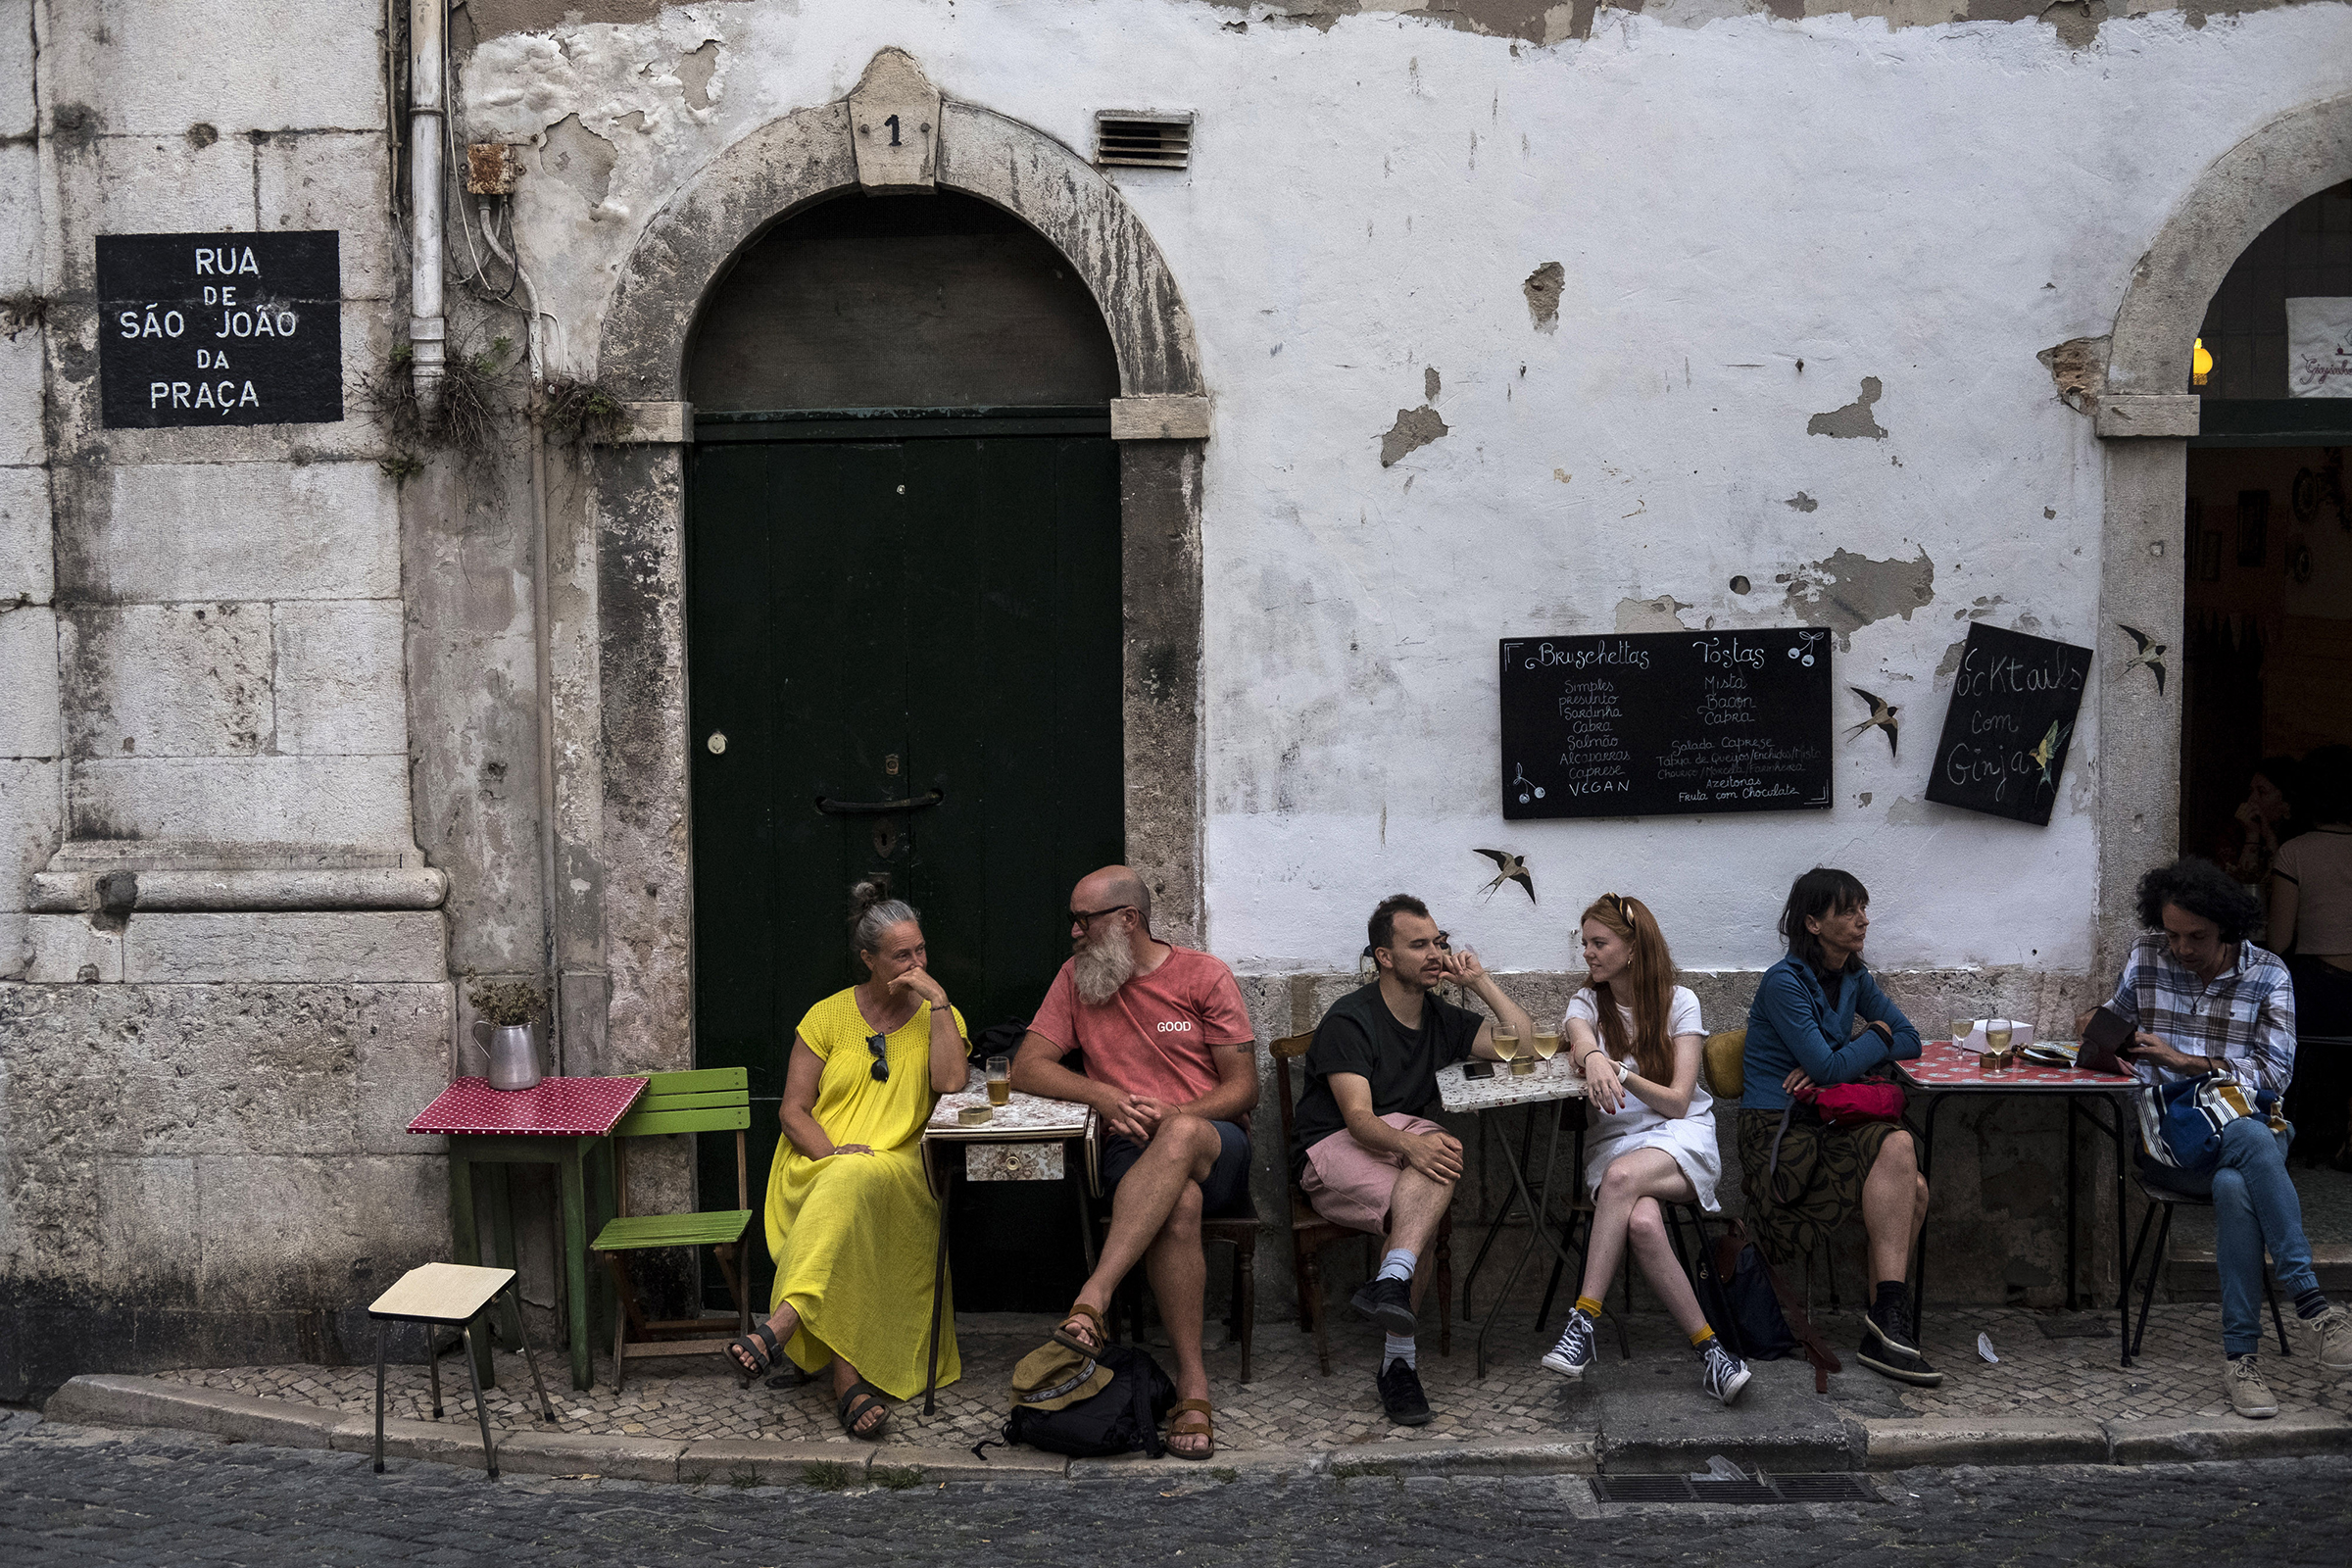 A street in the Alfama neighborhood of Lisbon, Portugal, on Sept. 28, 2019. (Daniel Rodrigues—The New York Times/Redux)